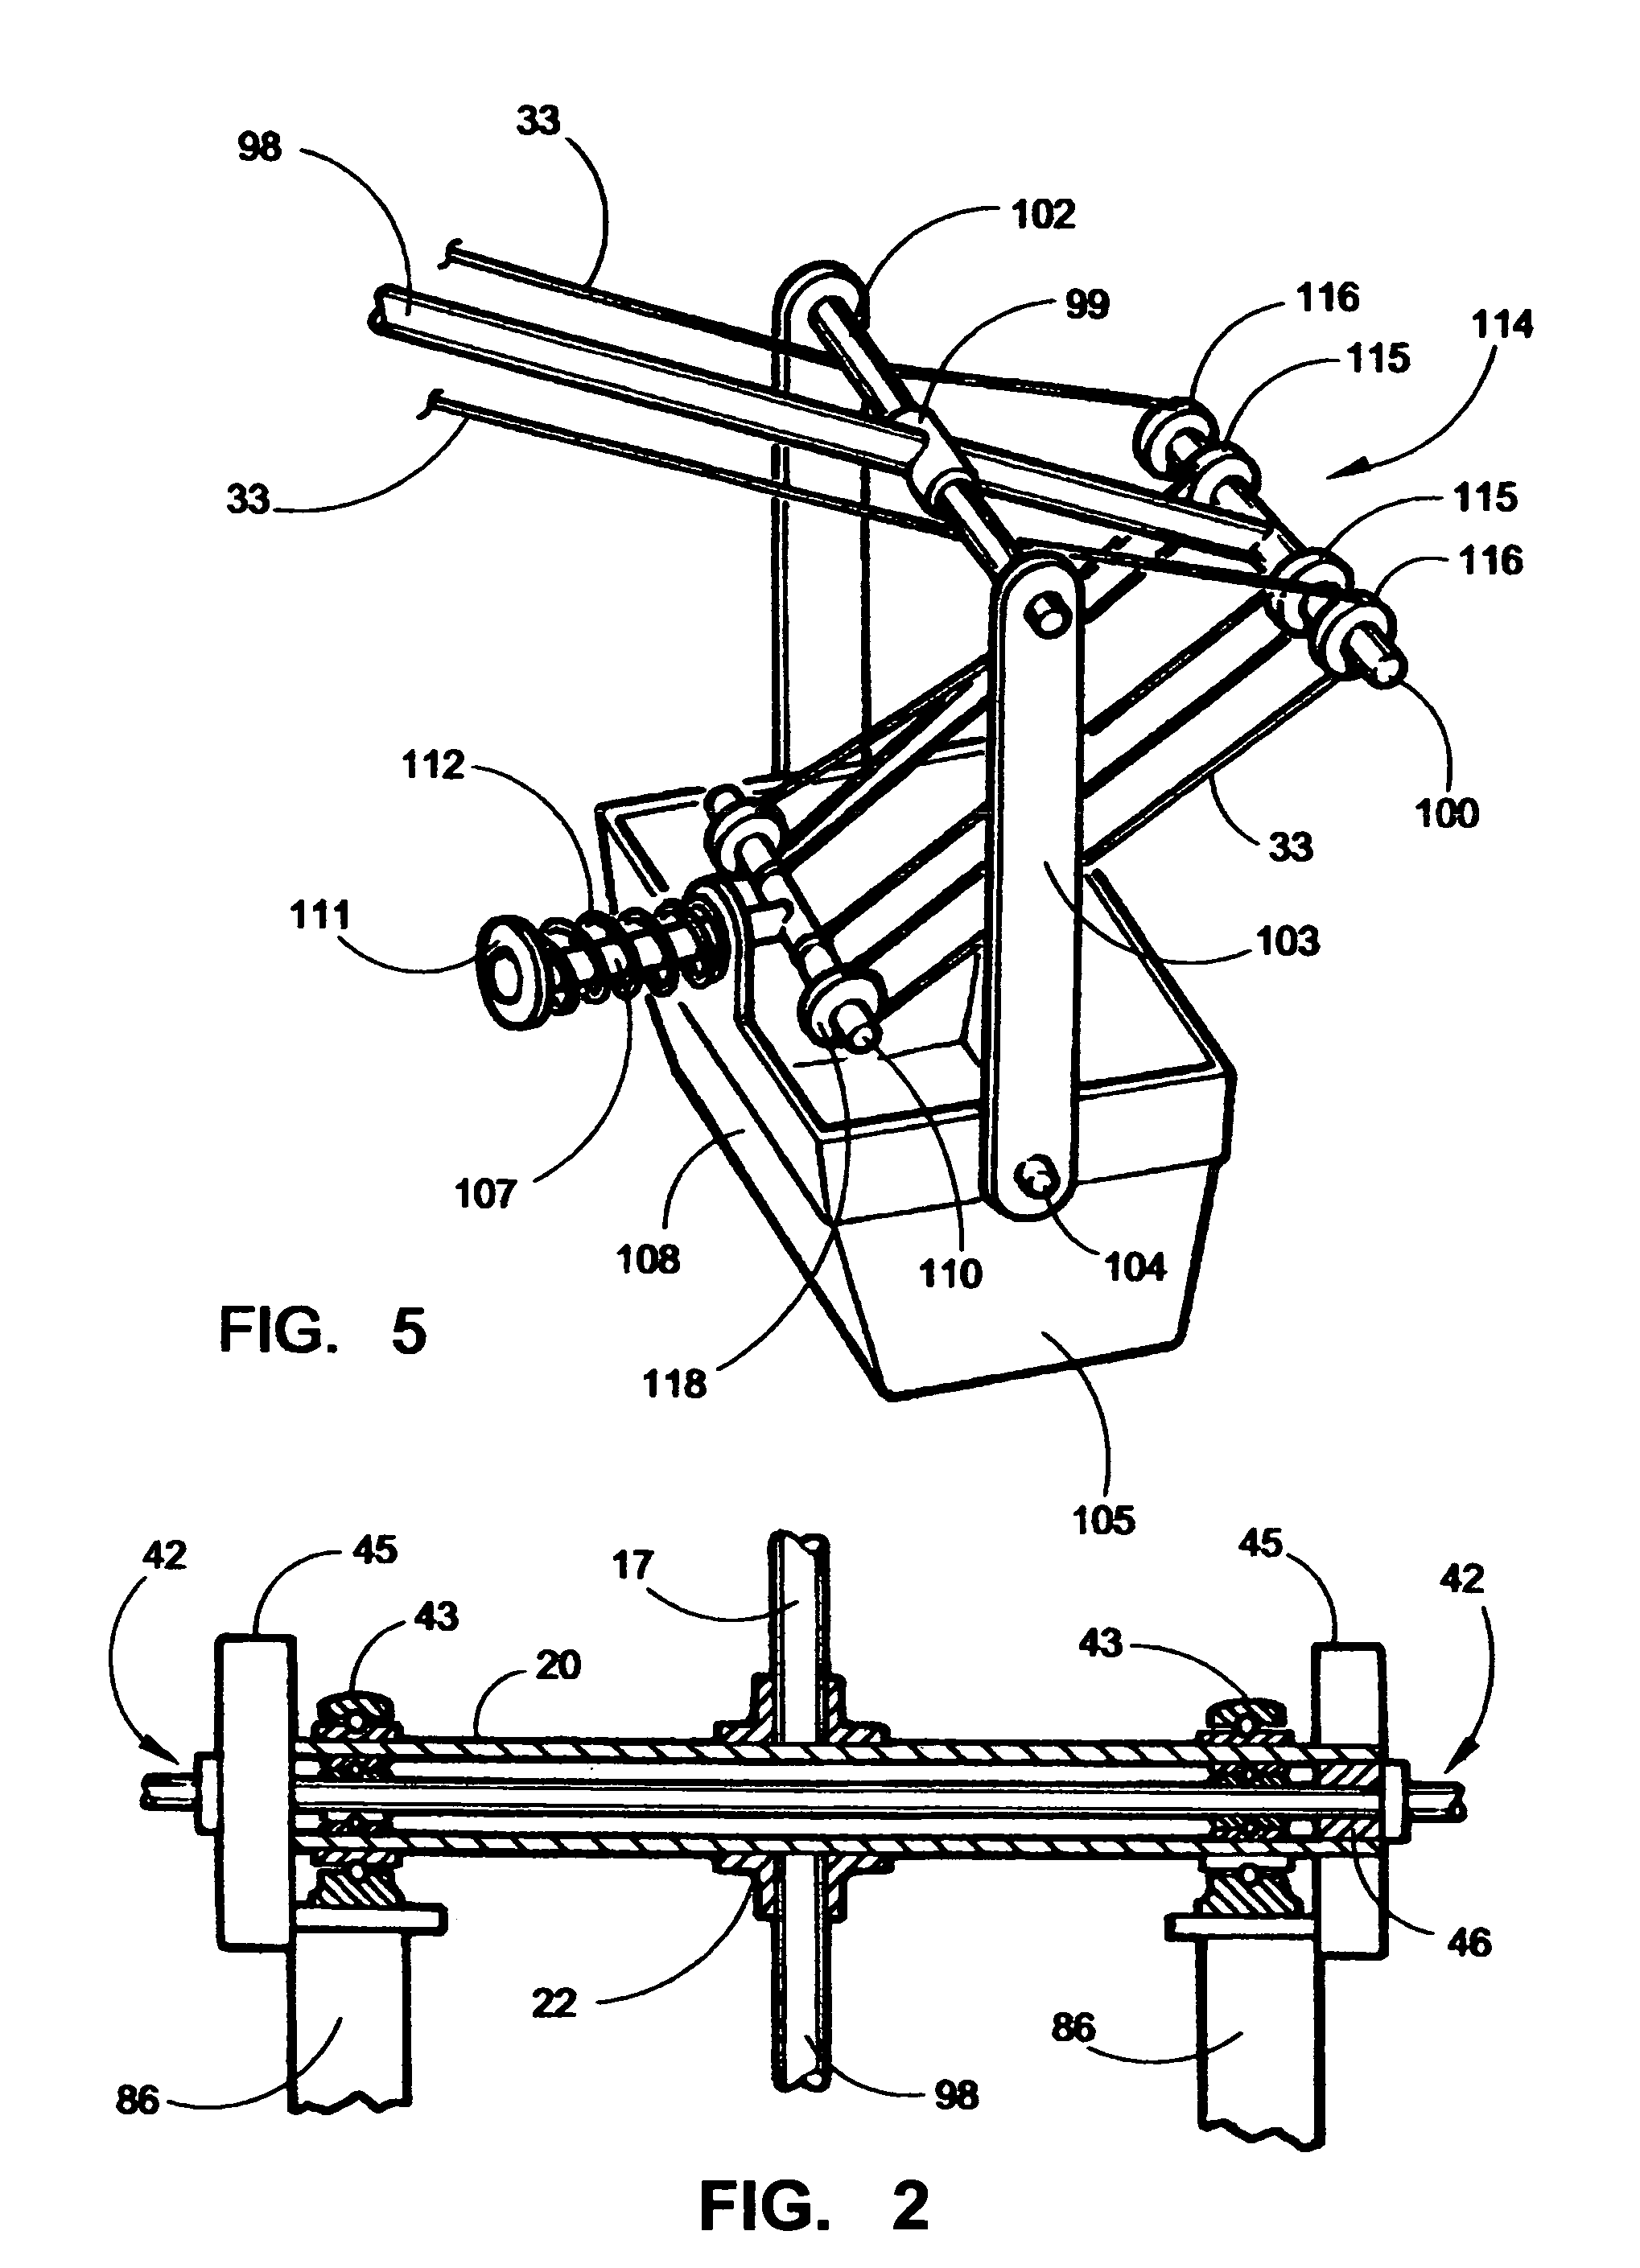 Wind powered pendulating land sail electricity generation system